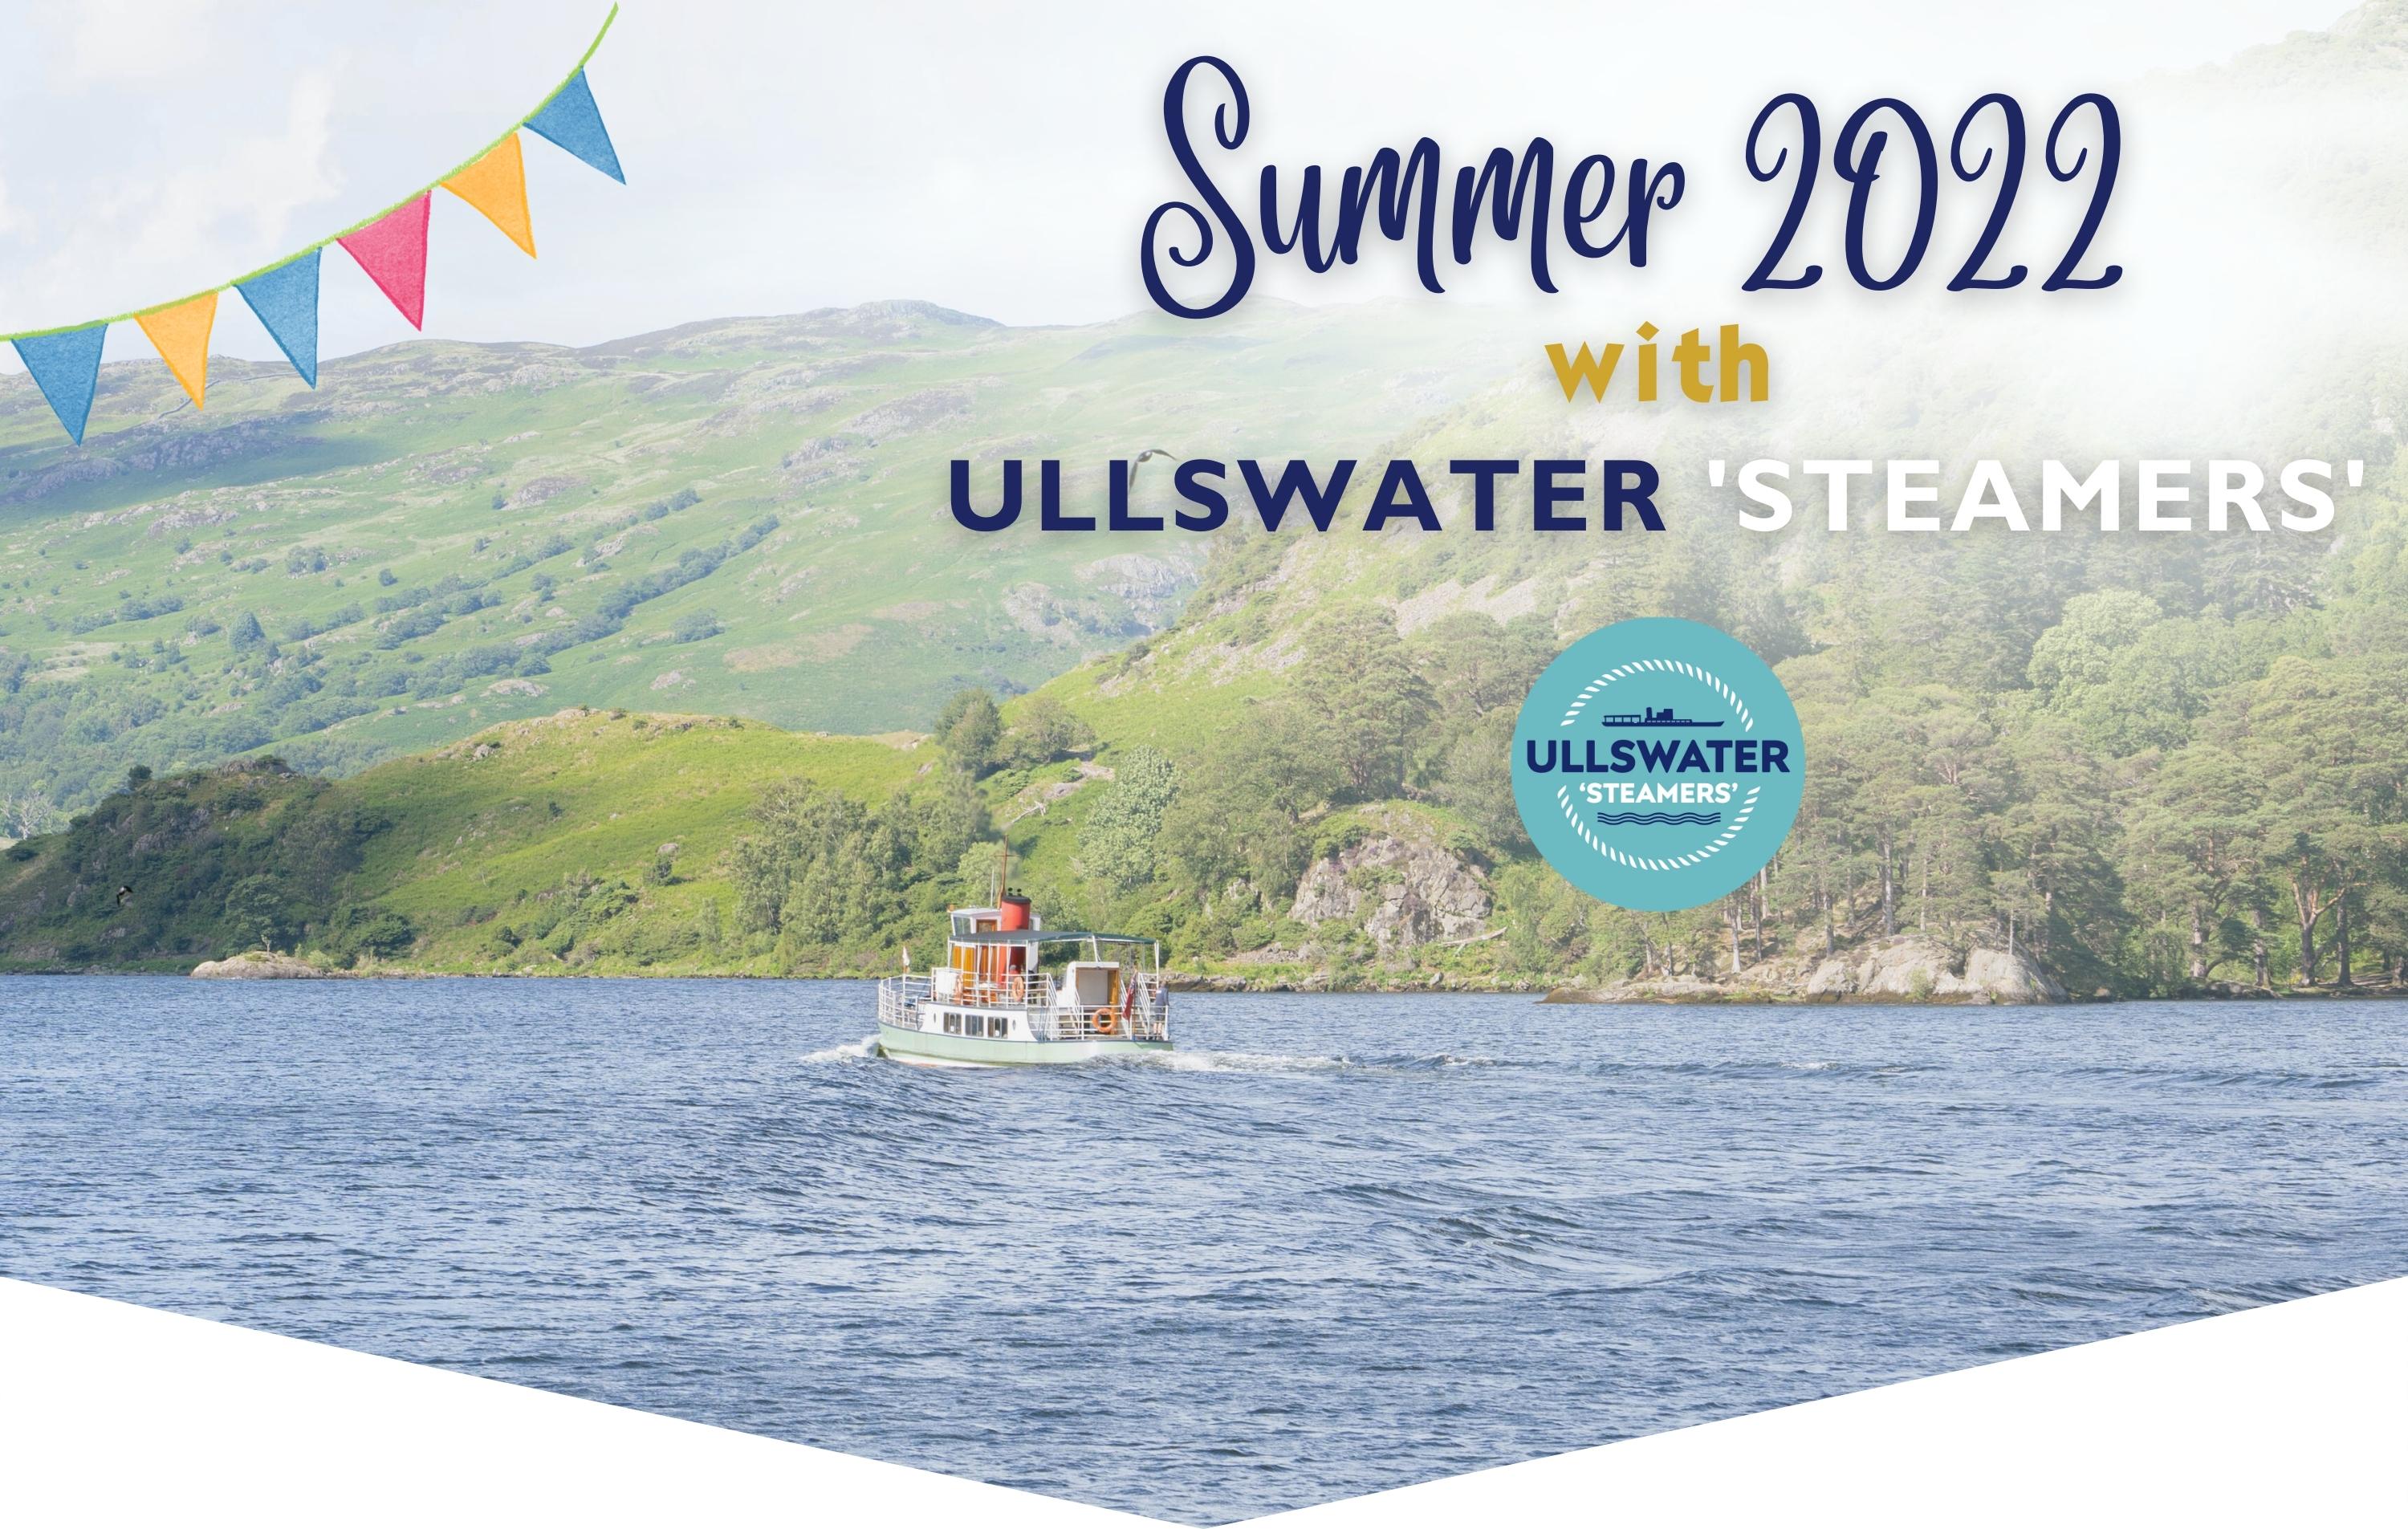 Summer 2022 with Ullswater Steamers